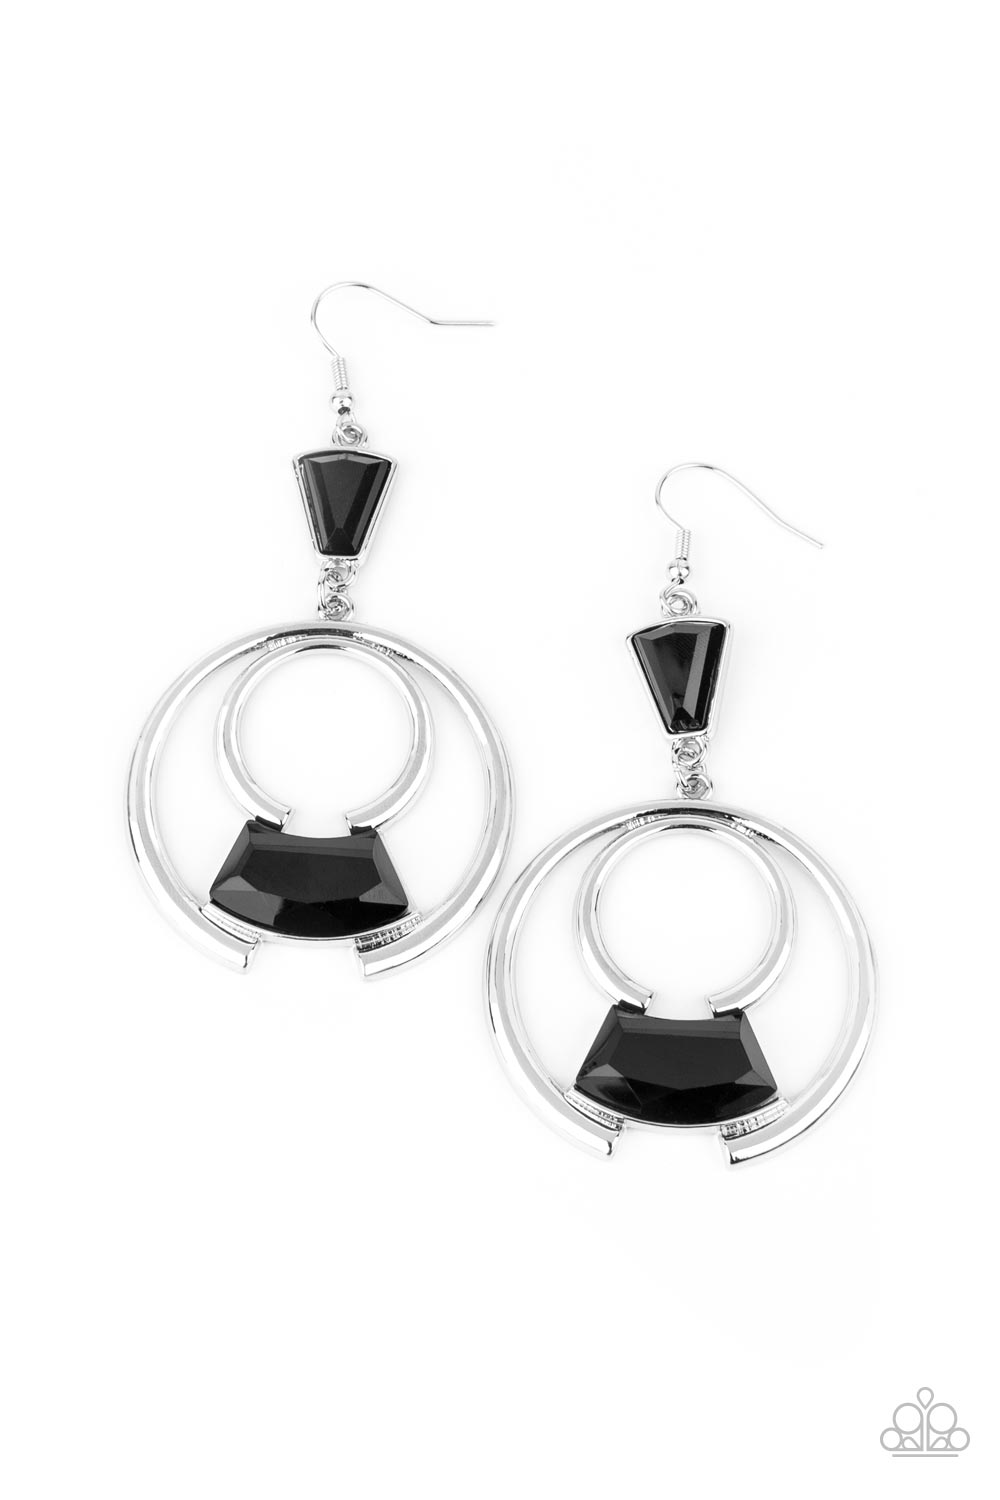 Deco Dancing Black Earring - Paparazzi Accessories  Bold silver circles create an eye-catching frame for a faceted black gem. The trendy pendant sways from a triangular black gem anchor for an embellished finish. Earring attaches to a standard fishhook fitting.  All Paparazzi Accessories are lead free and nickel free!  Sold as one pair of earrings.